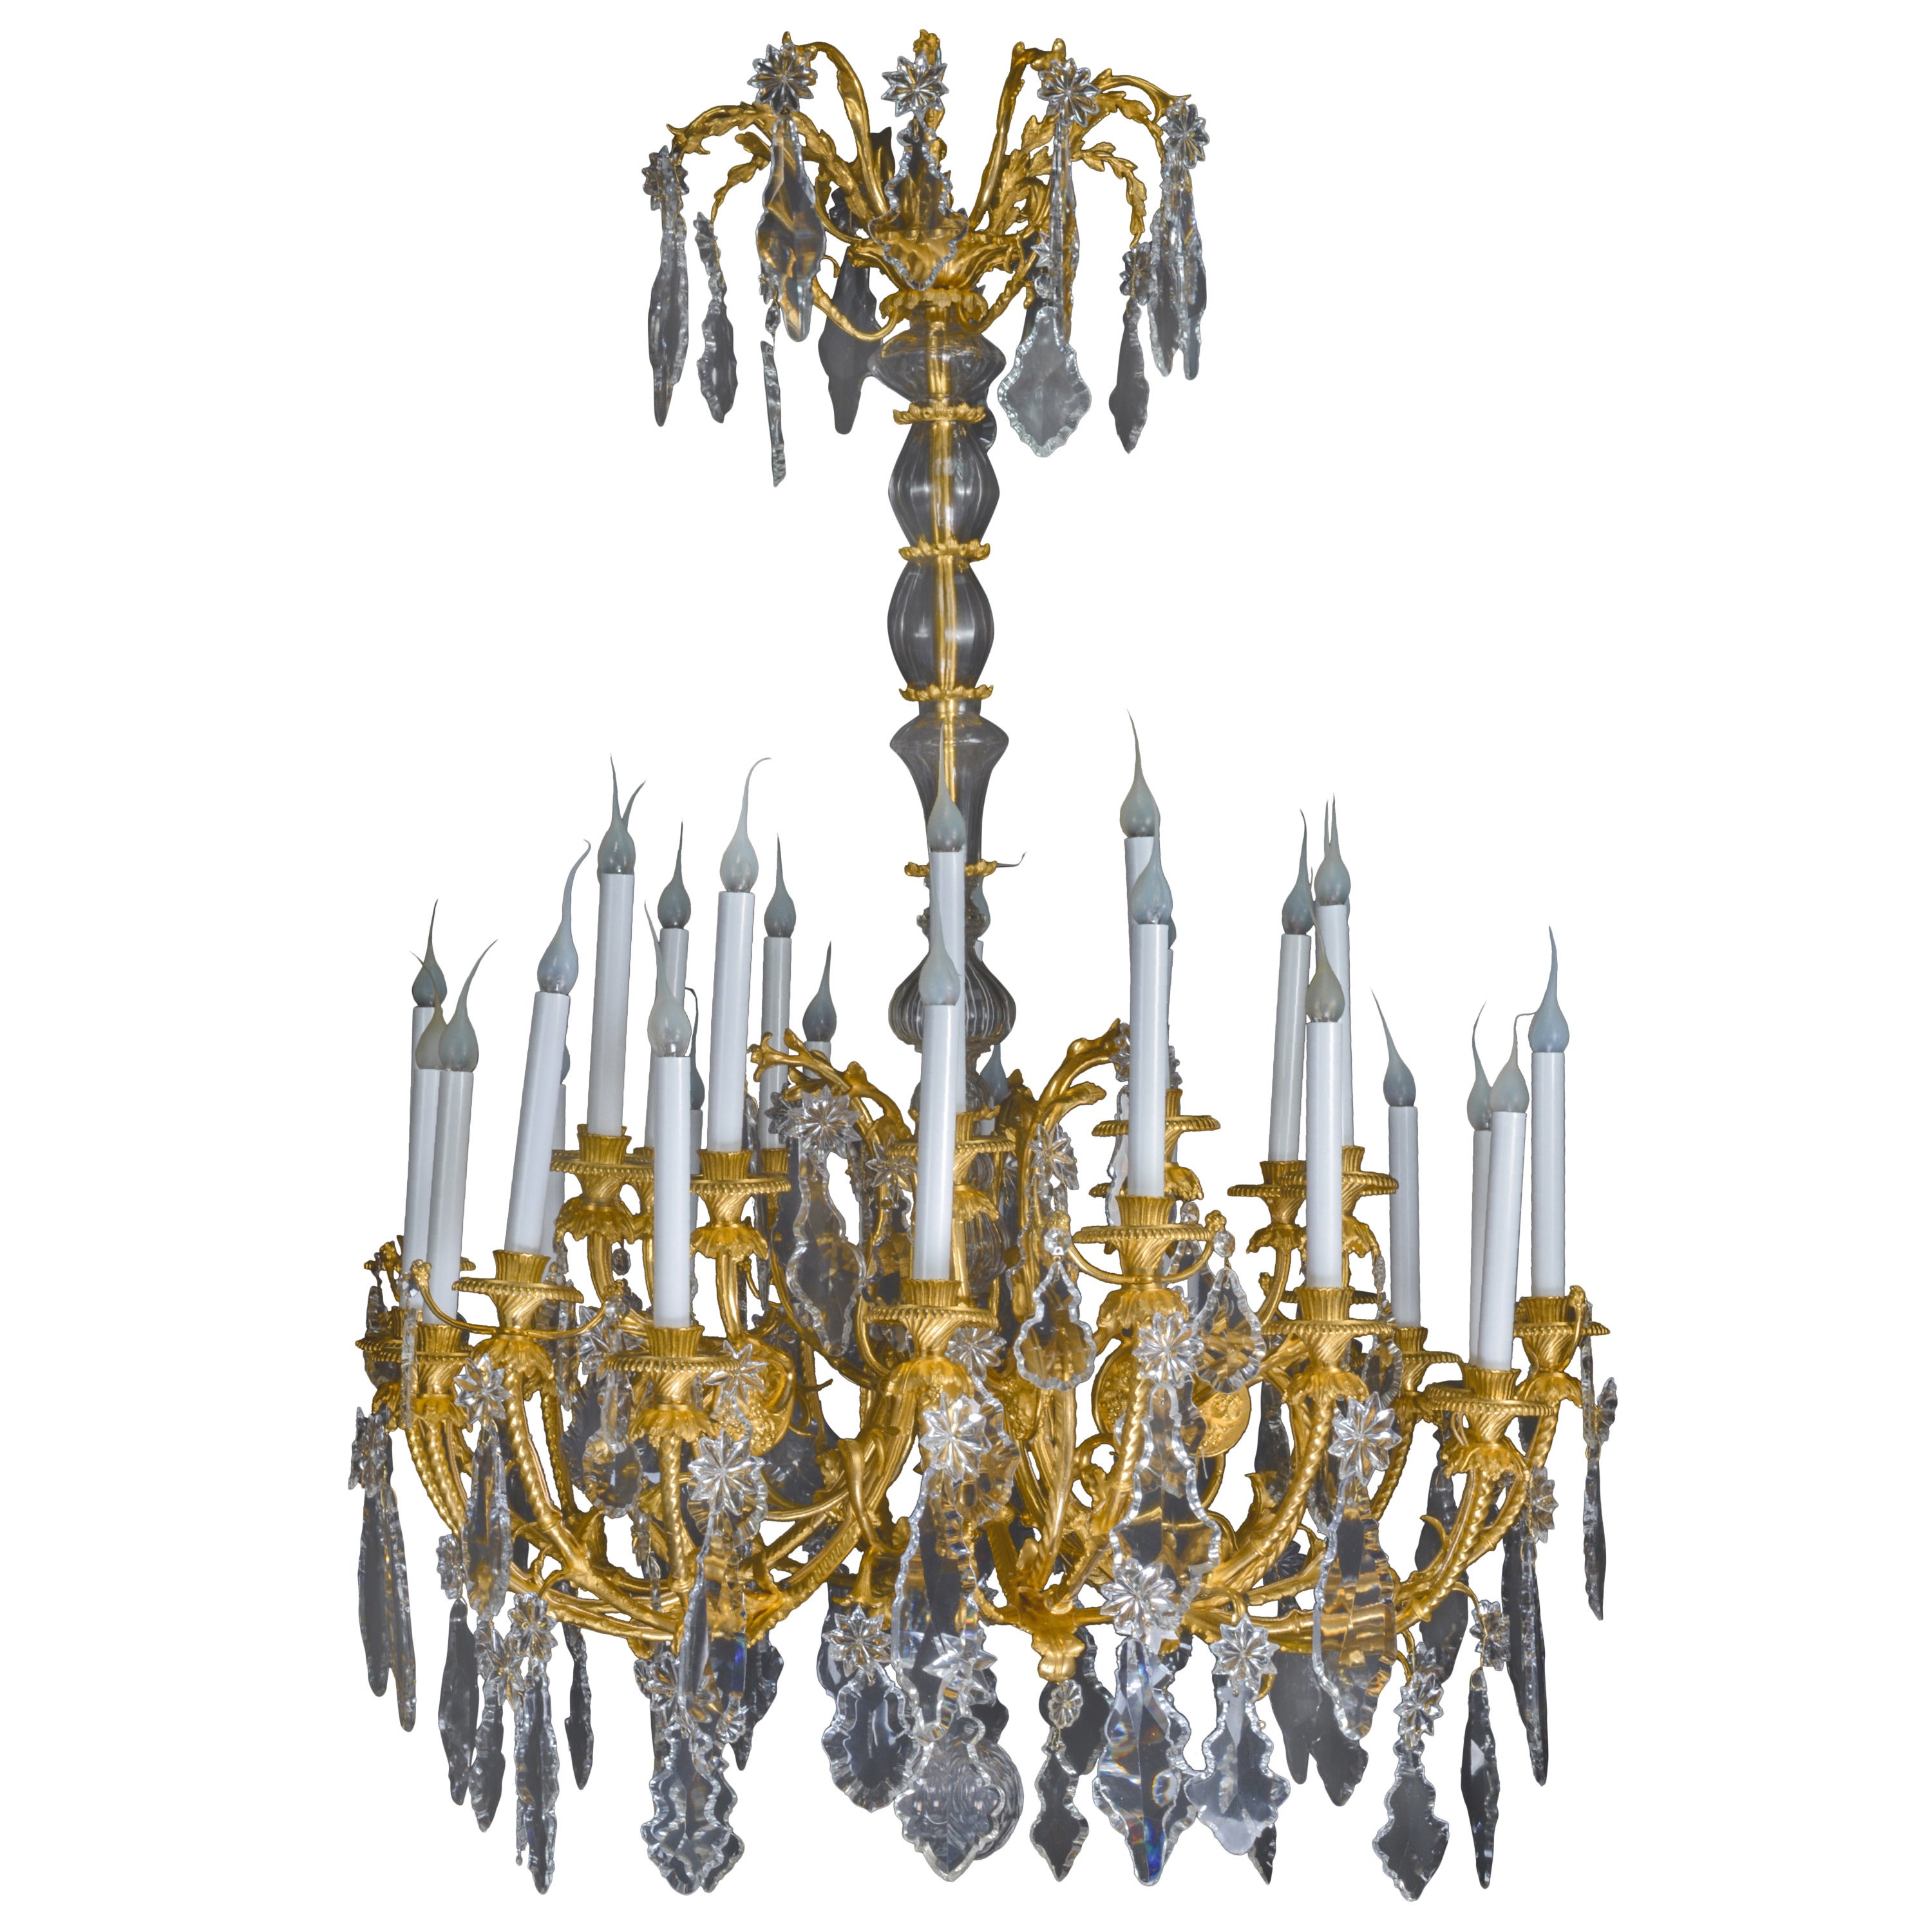 Spectacular Antique French Louis XVI Style Baccarat Bronze & Crystal Chandelier For Sale